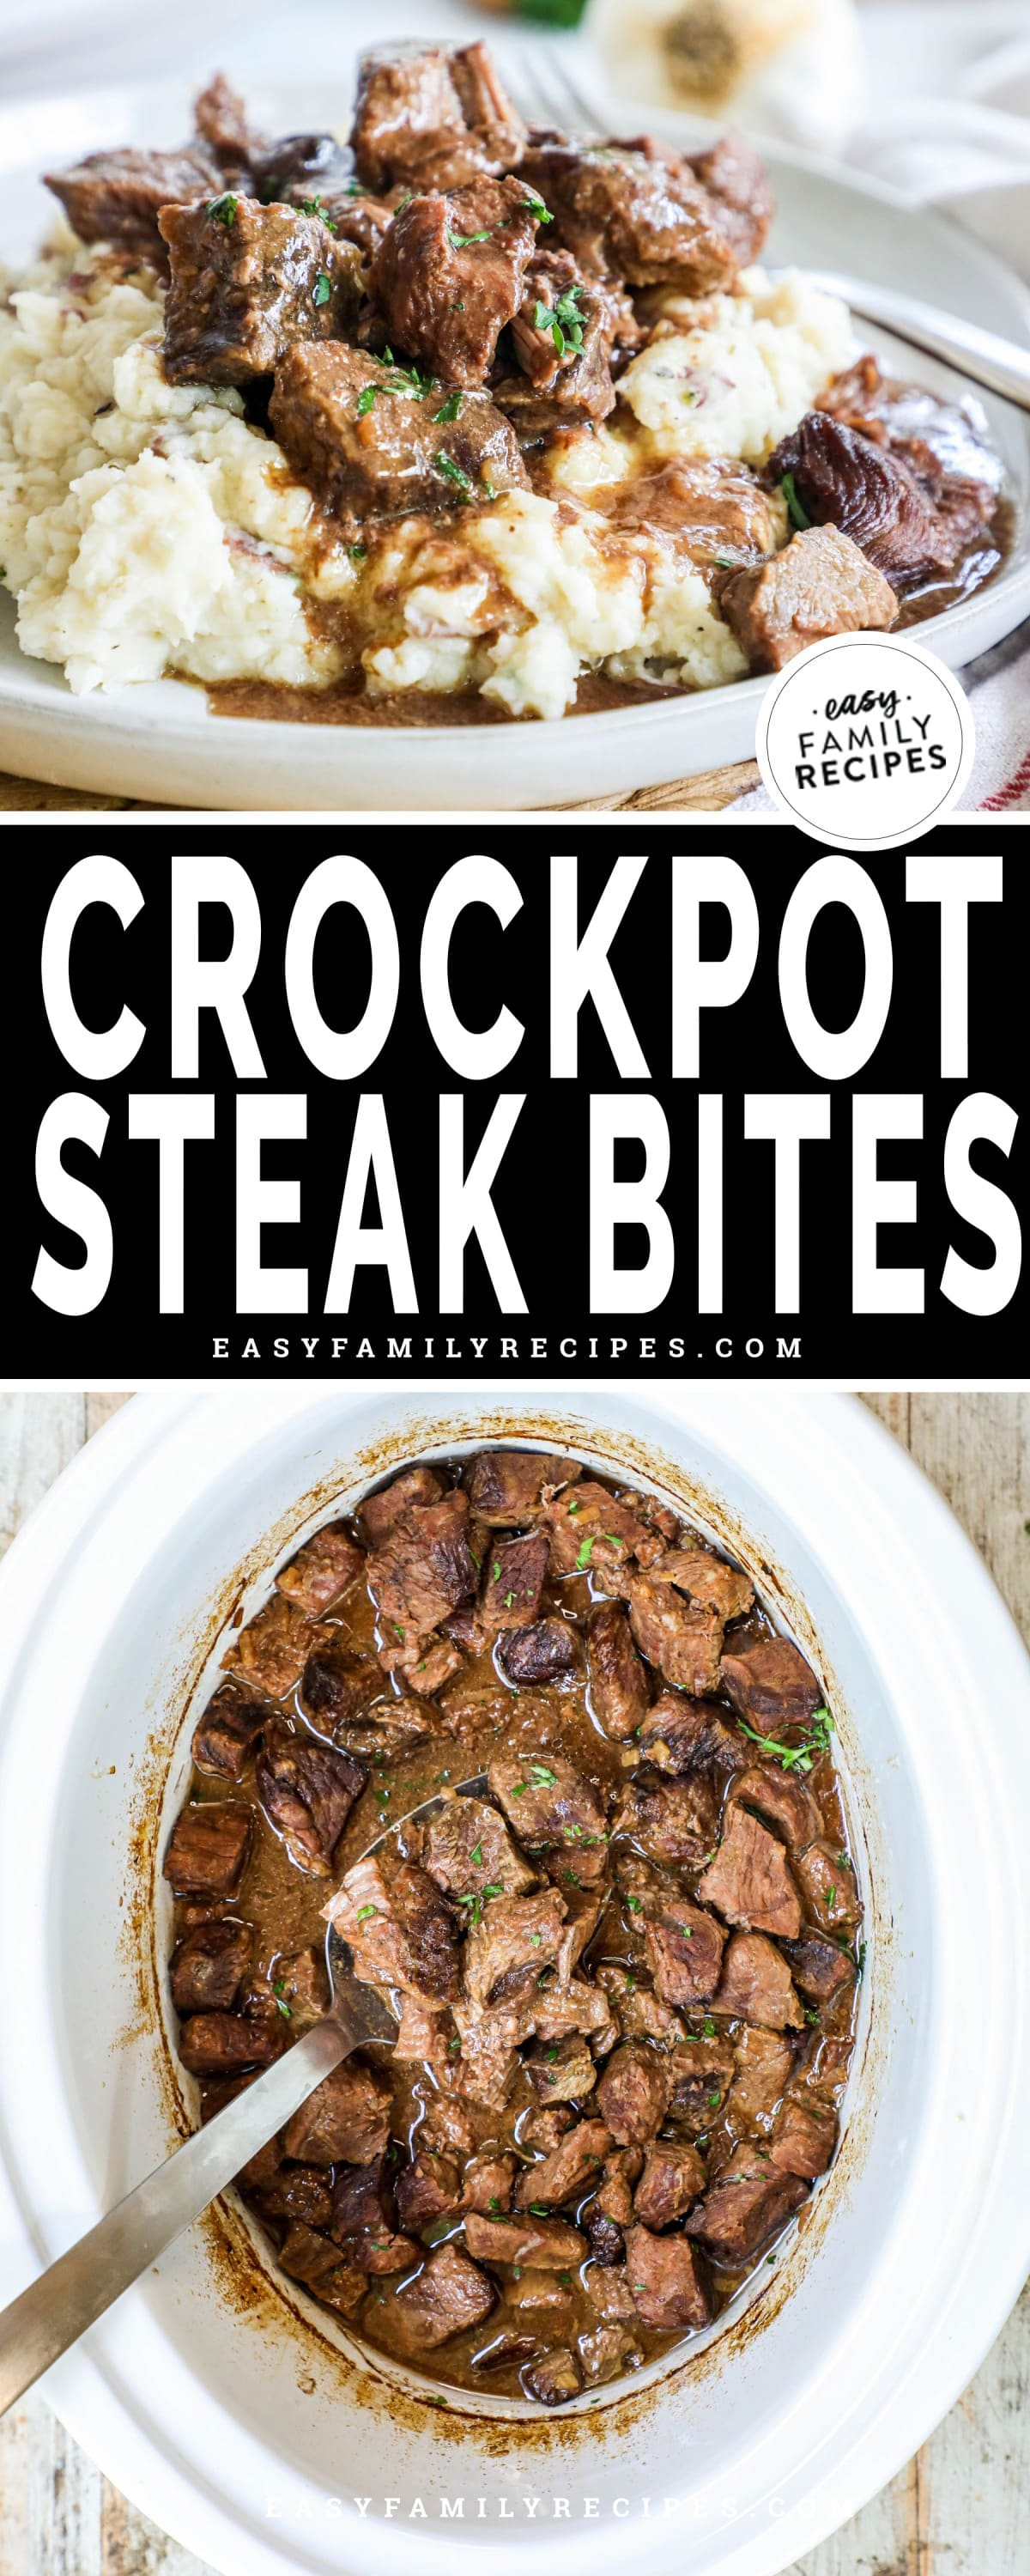 Crockpot steak bites on plate with mashed potatoes and crockpot steak bites in slow cooker